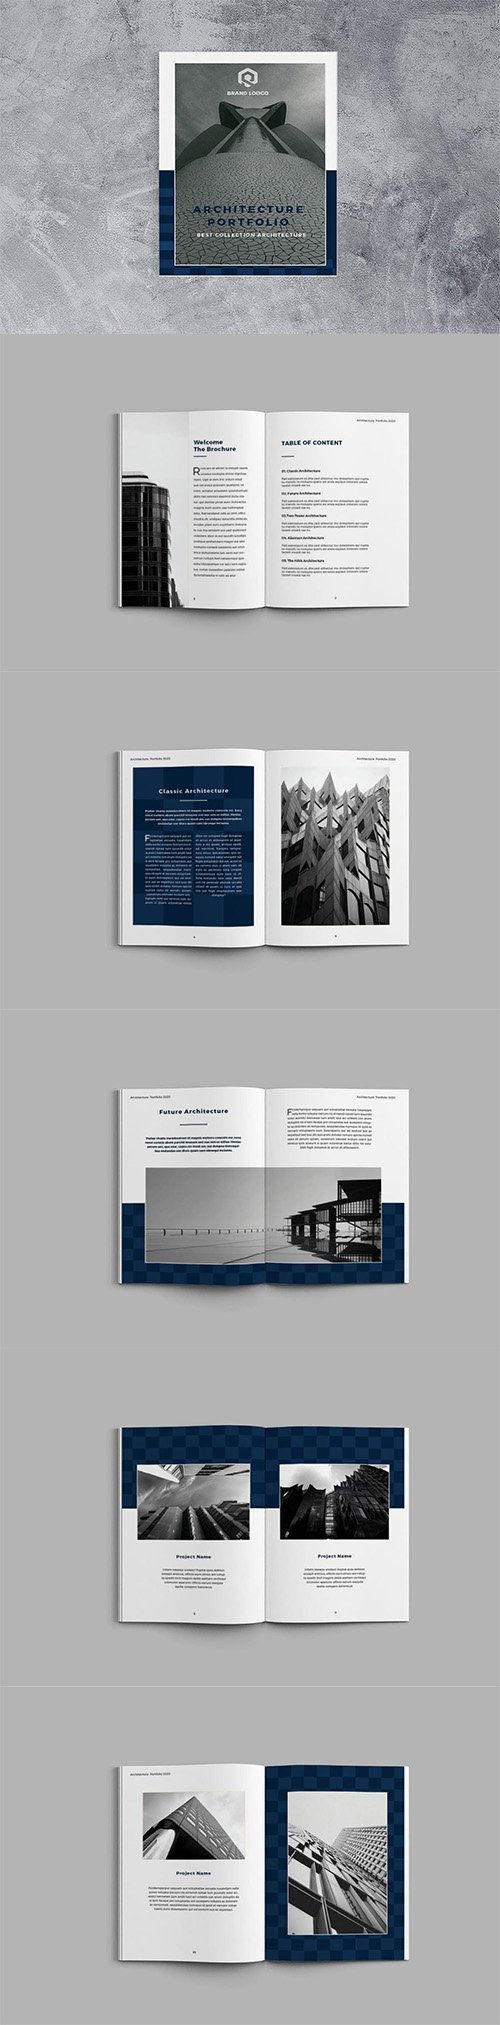 Architecture Brochure INDD